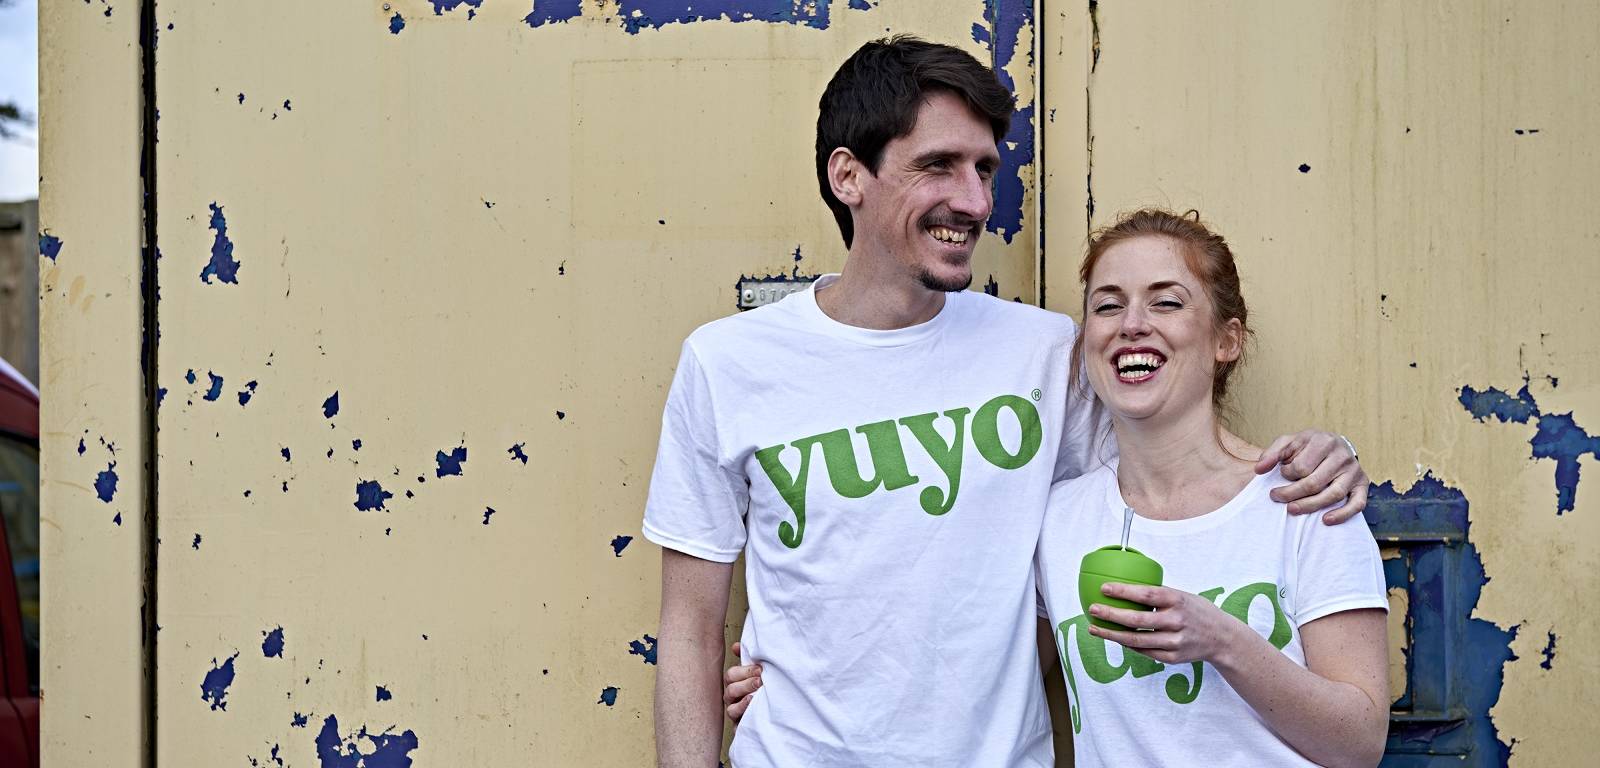 Charles and me, the founders of Yuyo Yerba Mate, having a good laugh